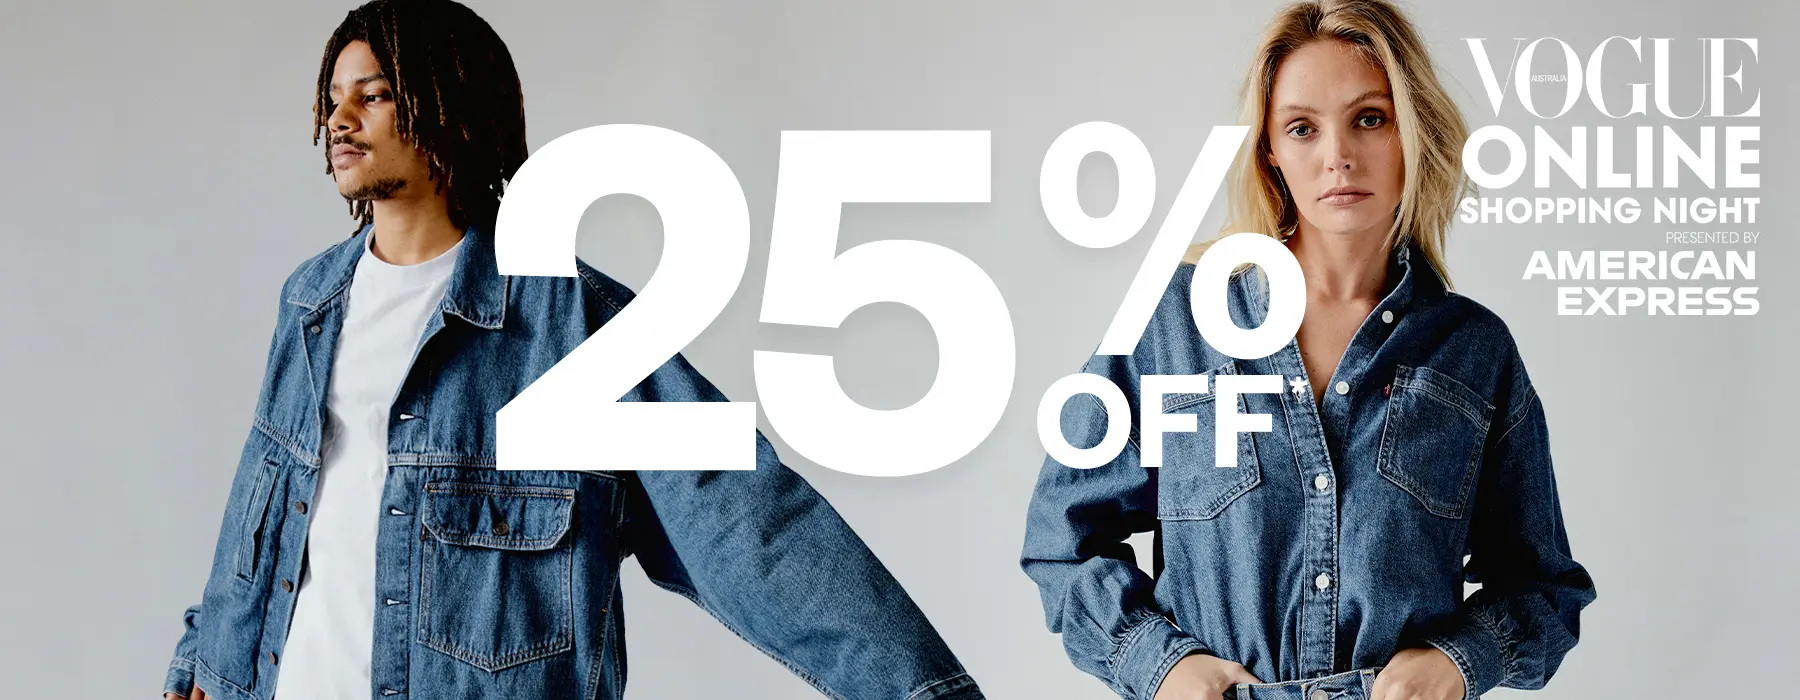 25% OFF at Vogue Online Shopping Night